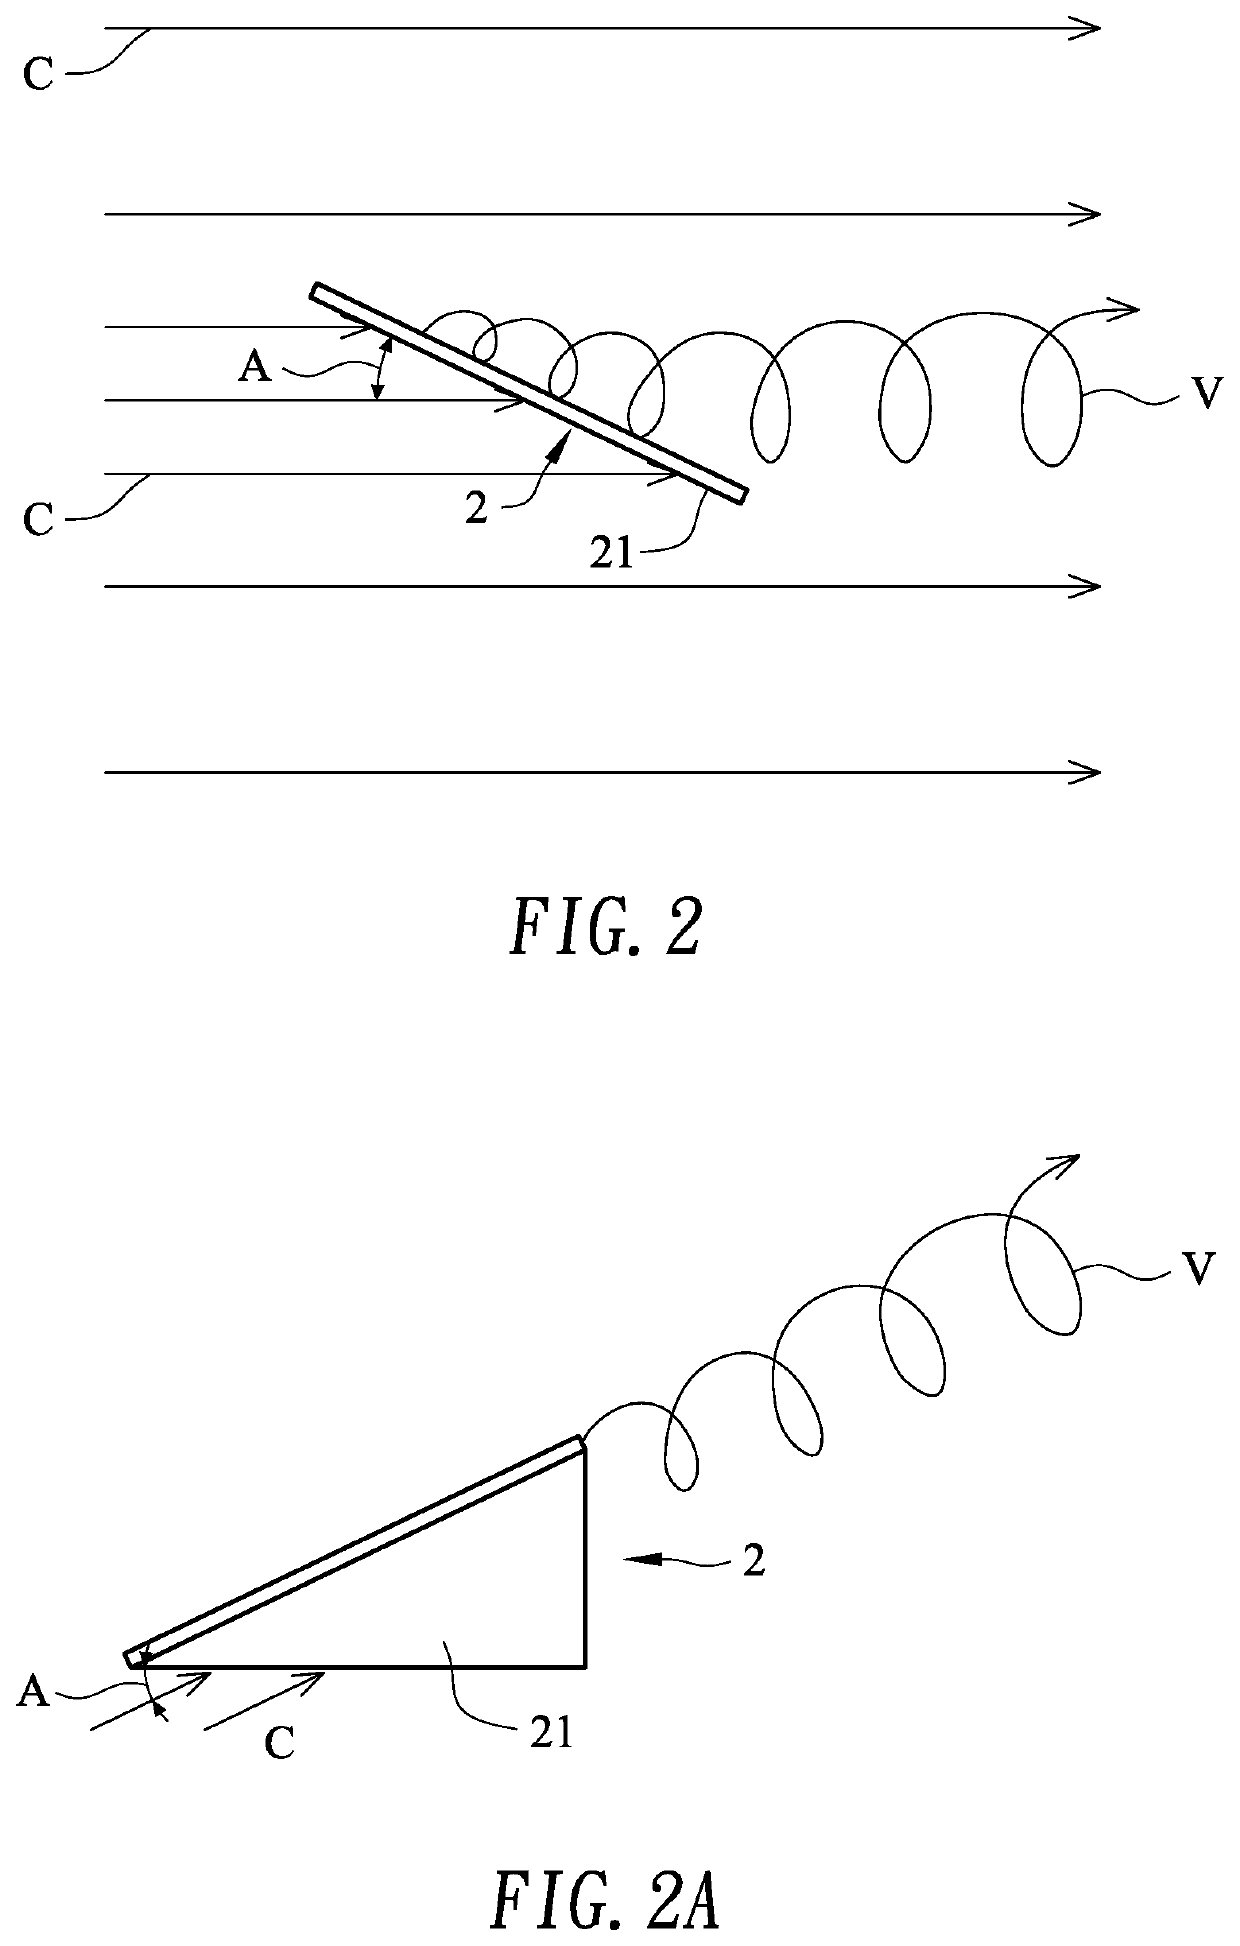 Structure for reducing the drag of a ship and its application